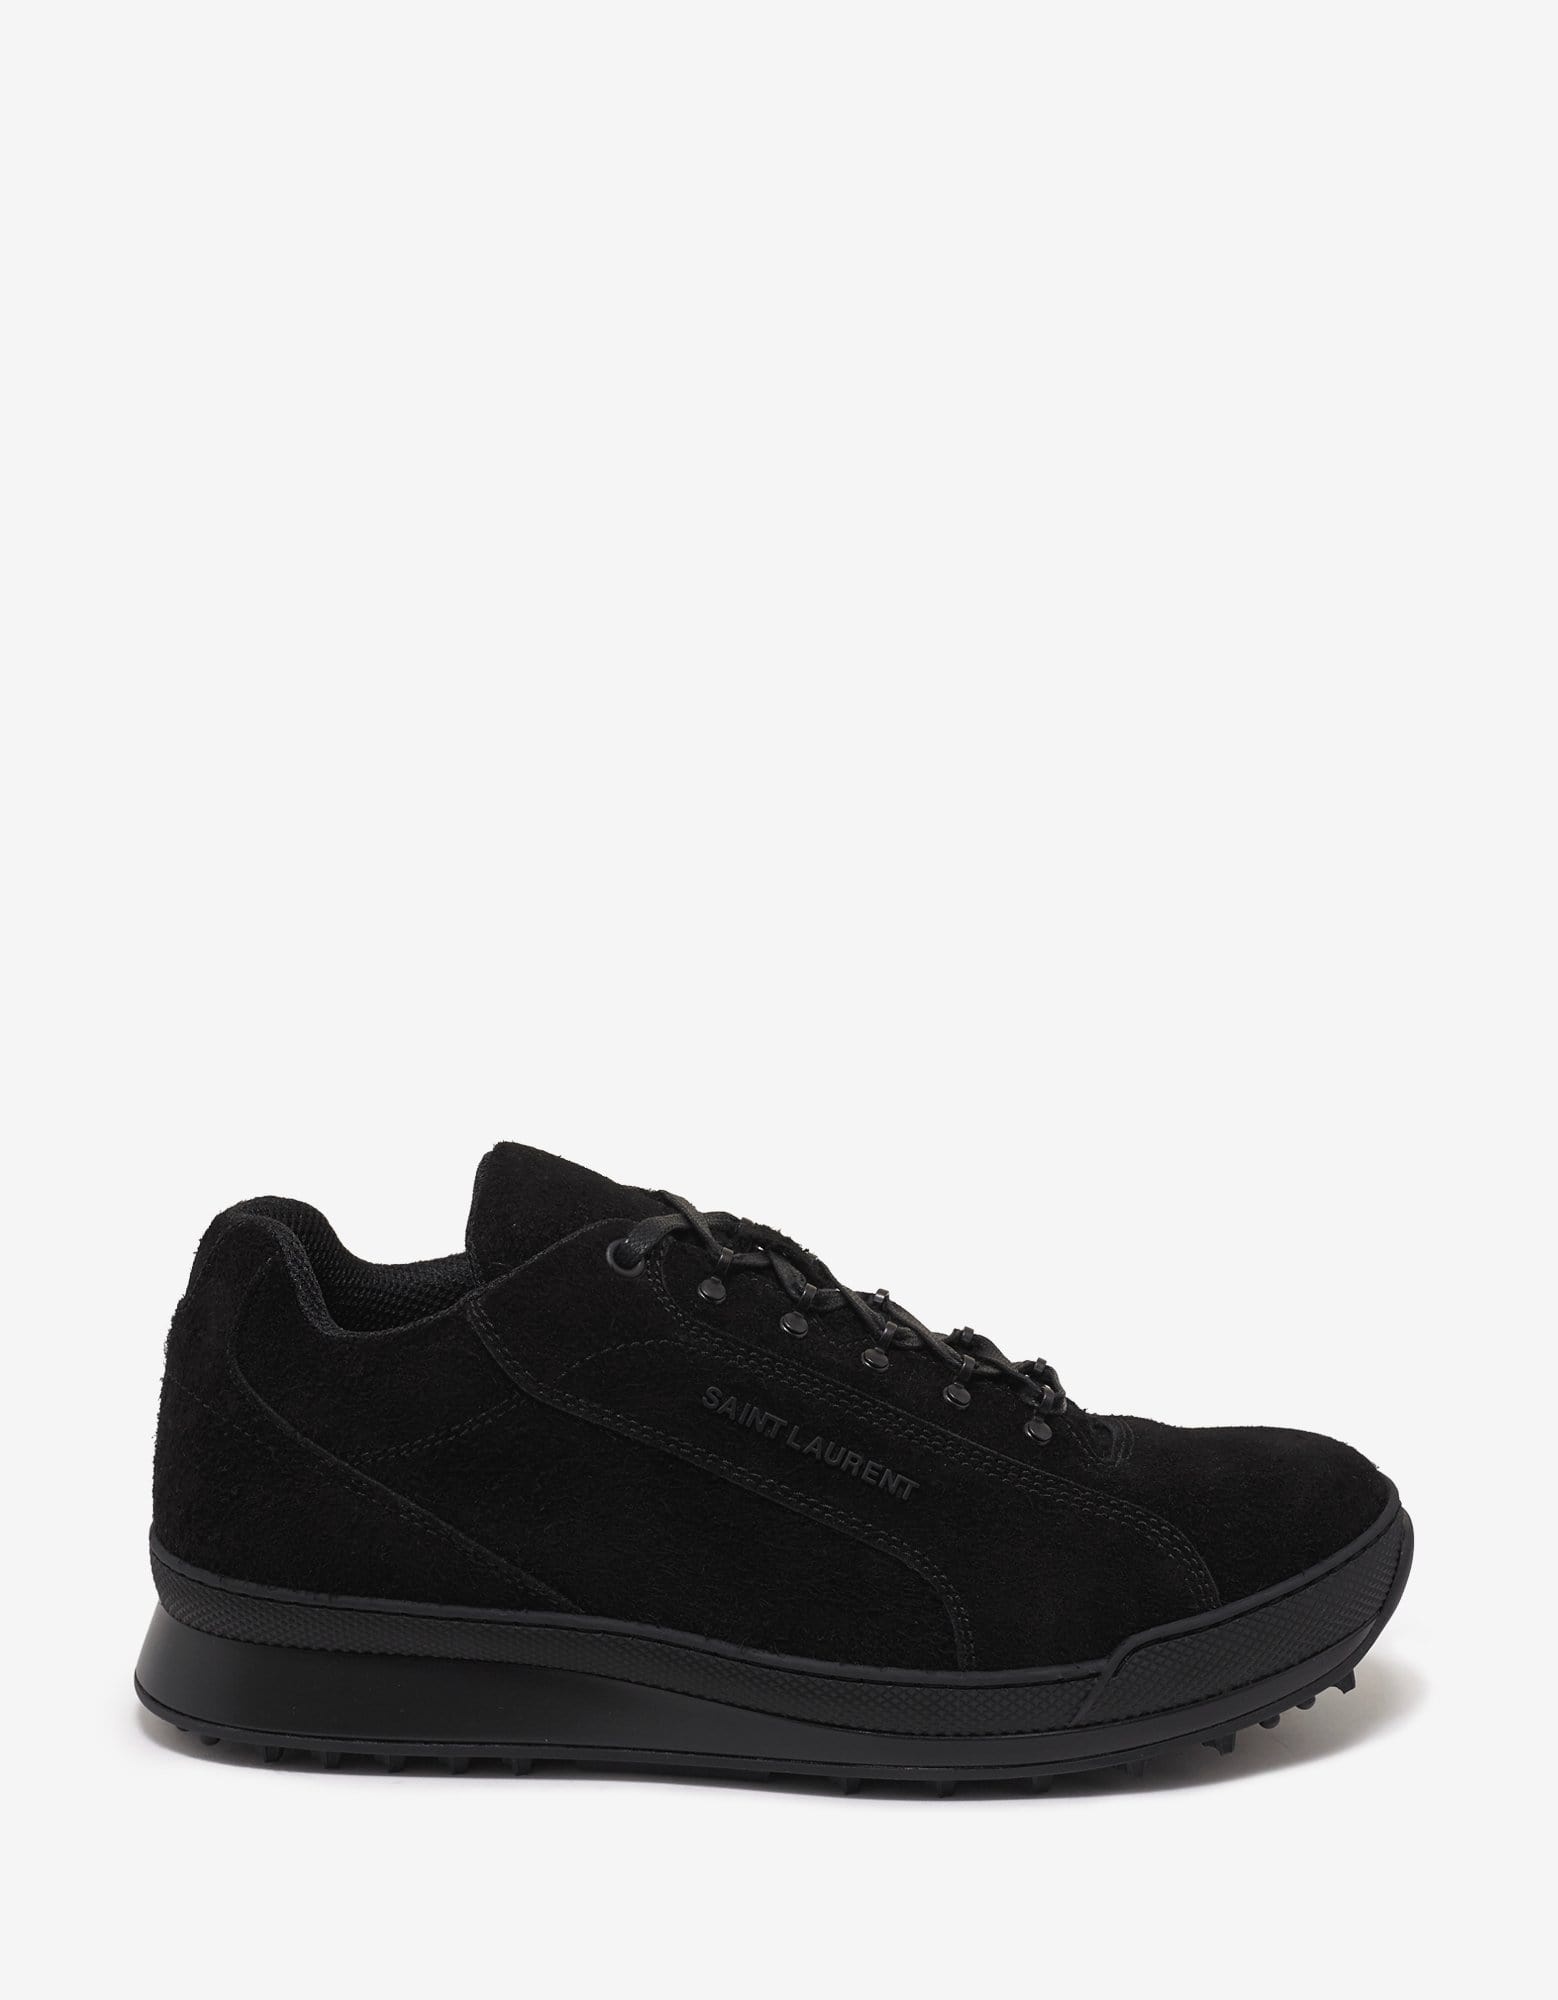 Black Suede Leather Jump Trainers - 2